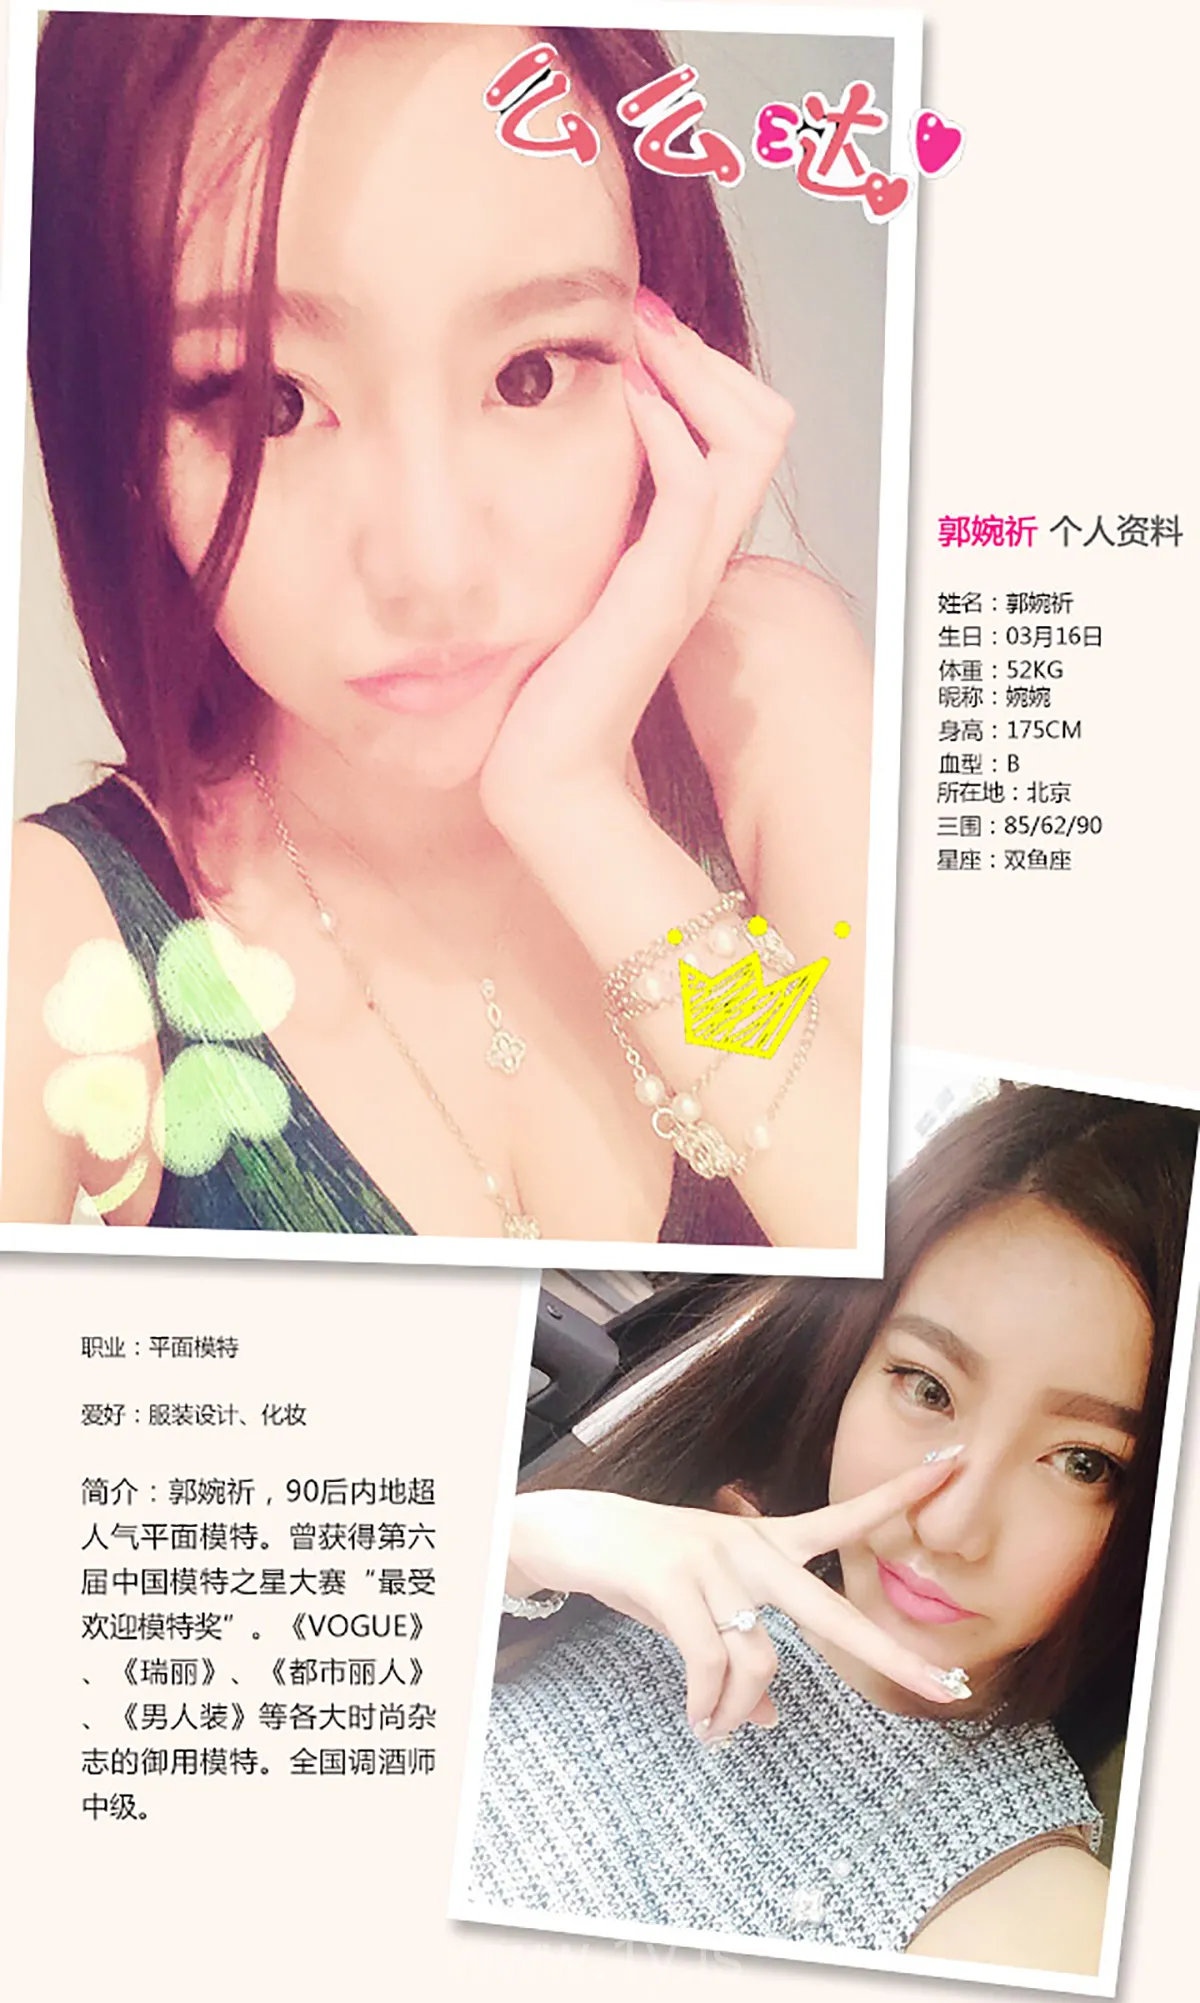 UGIRLS NO.195 Classy & Nice-looking Chinese Beauty 郭婉祈